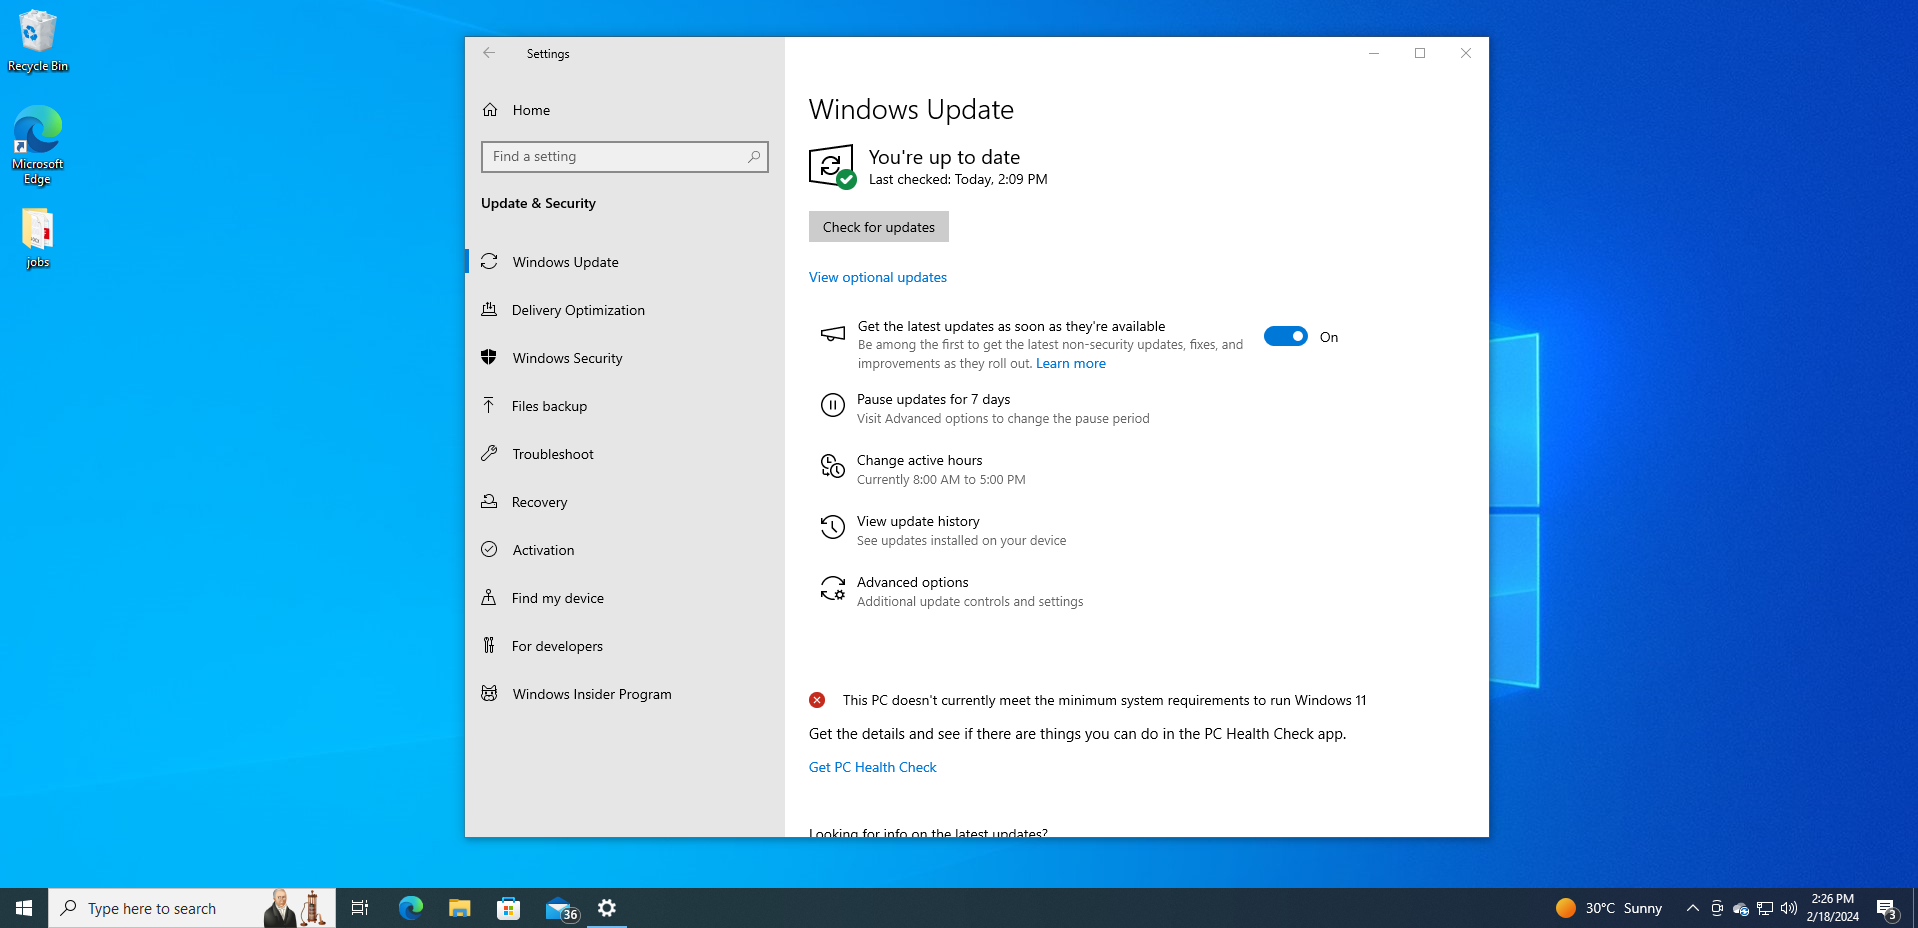 Screenshot of Windows Update settings showing the system is up to date, with a notification that the PC doesn't meet Windows 11 minimum requirements.